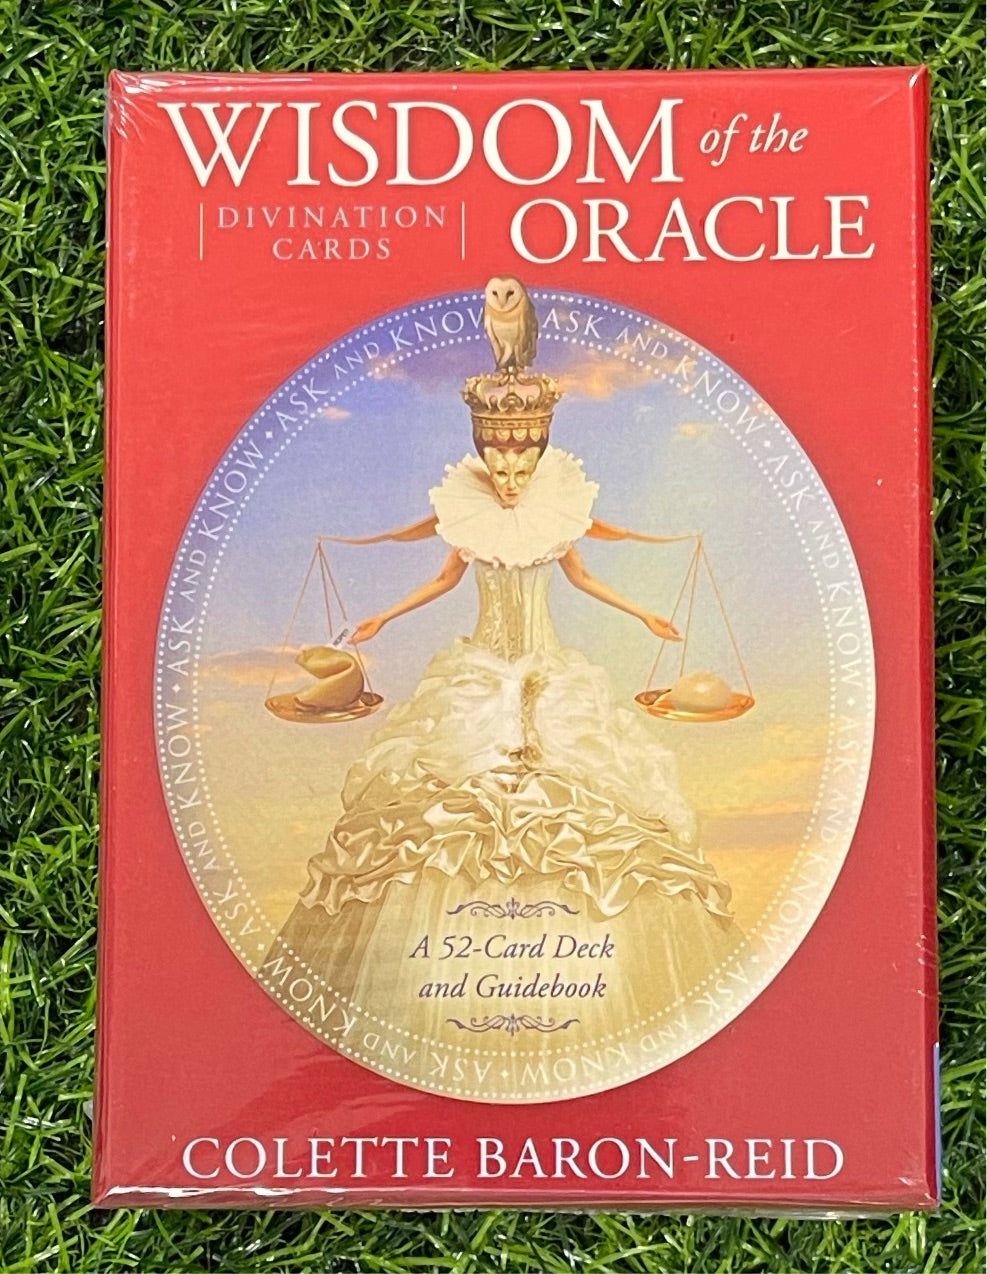 Wisdom Of The Divination Cards Oracle By Colette Ried-Baron